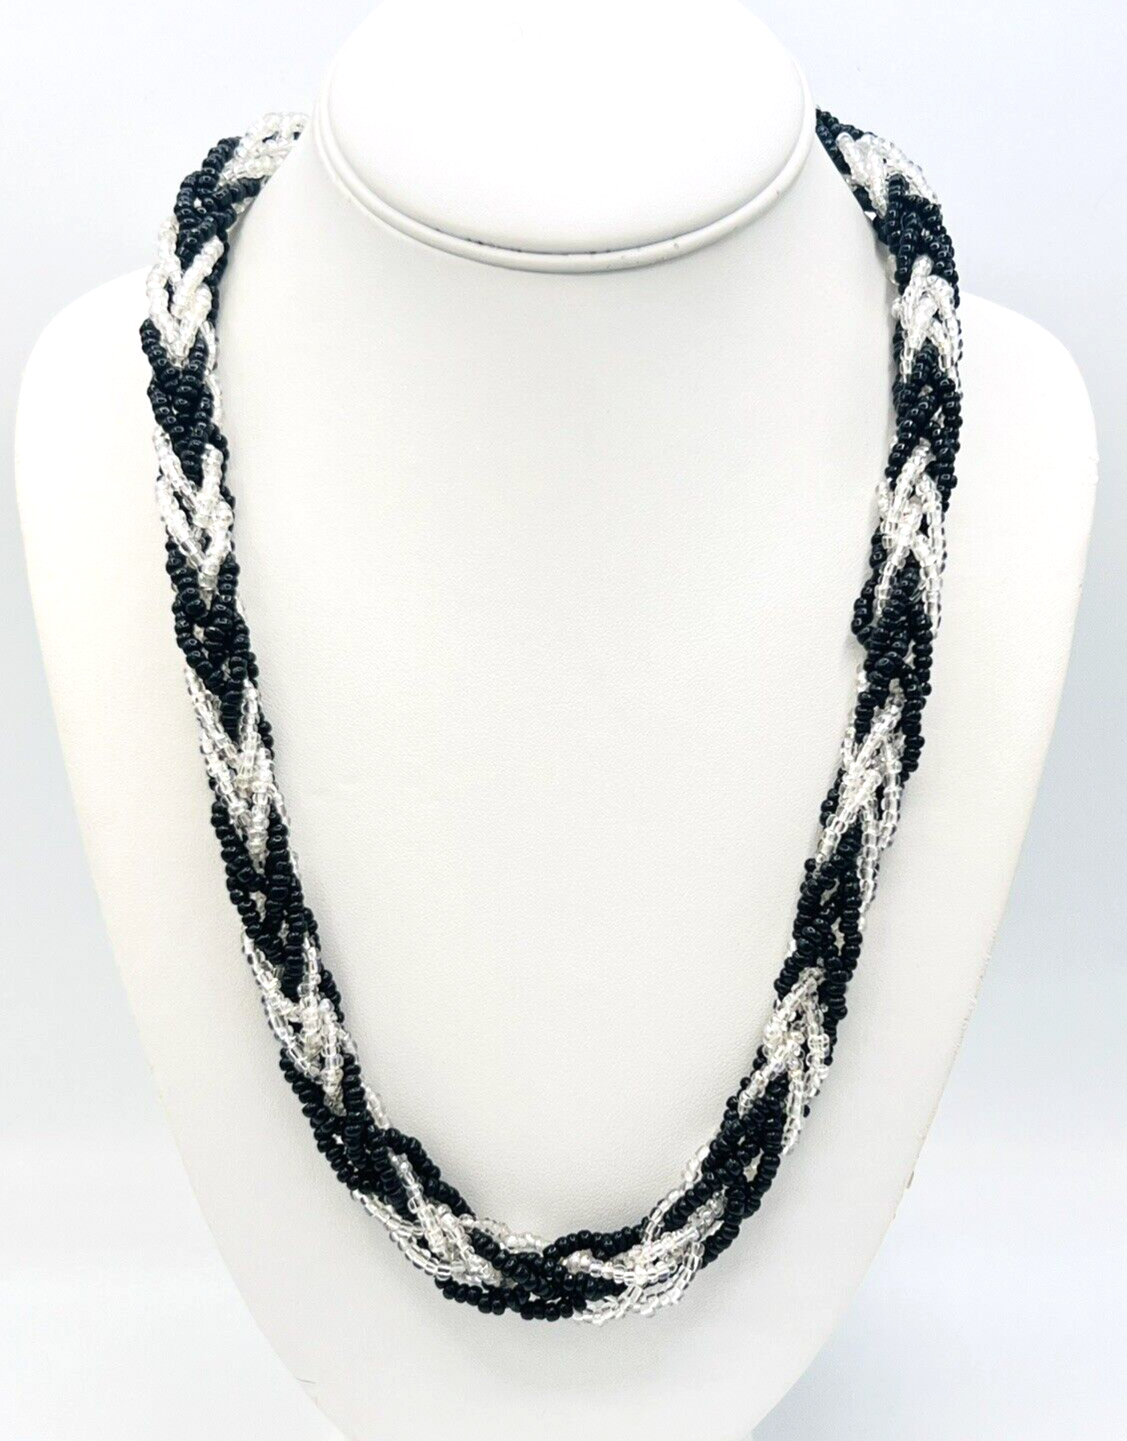 Primary image for Vintage Signed Trifari Black White Braided Seed Bead Necklace 24 in